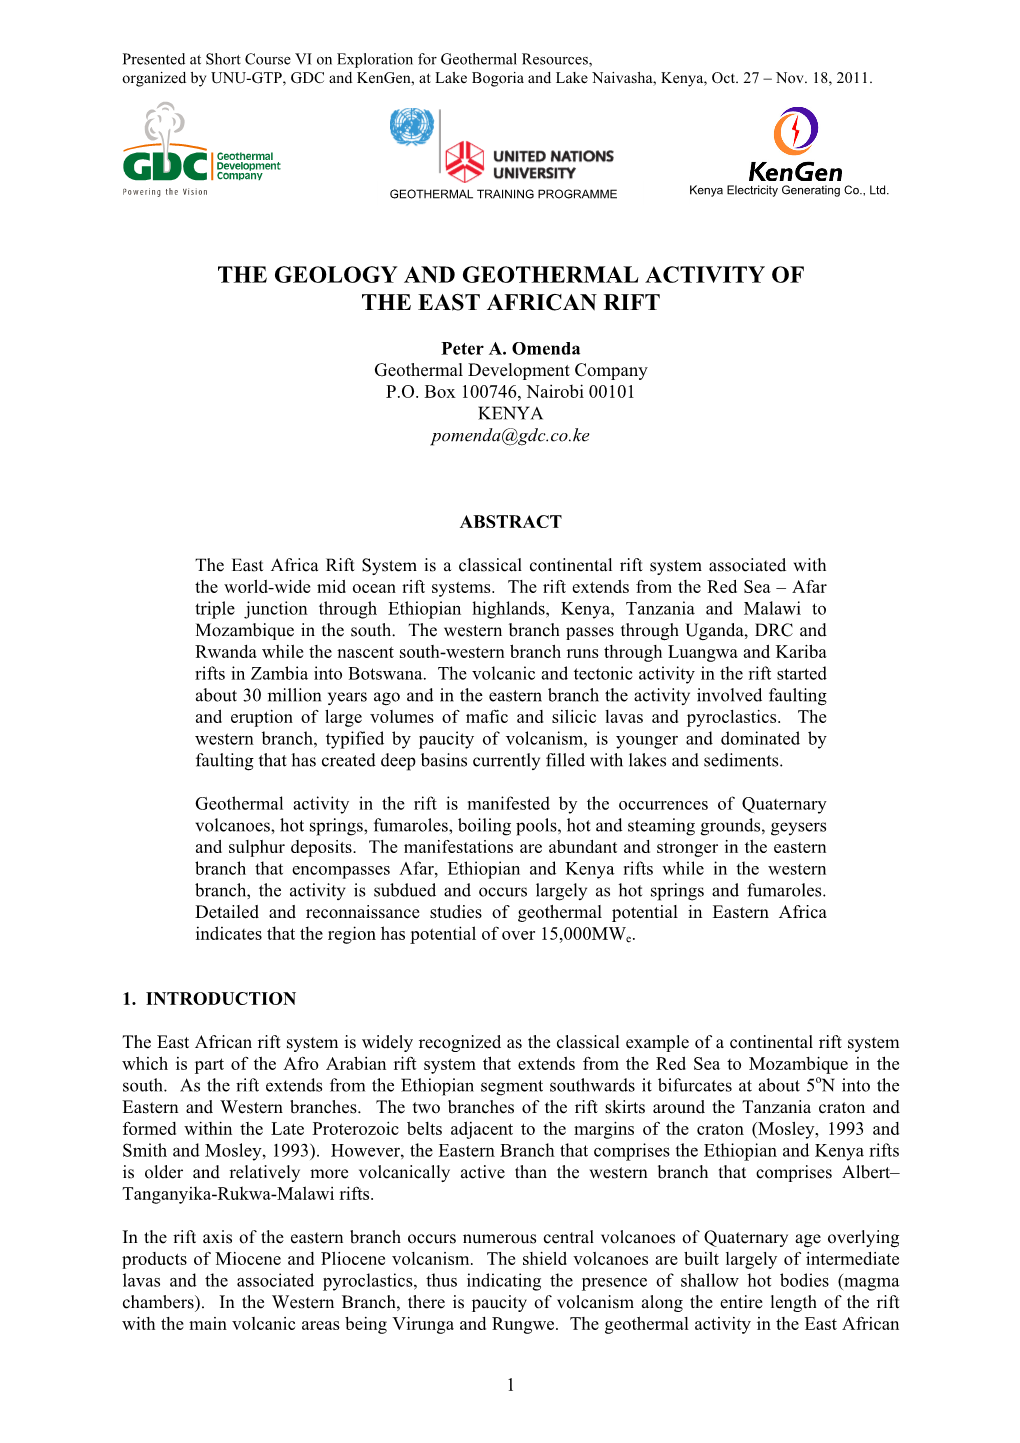 The Geology and Geothermal Activity of the East African Rift